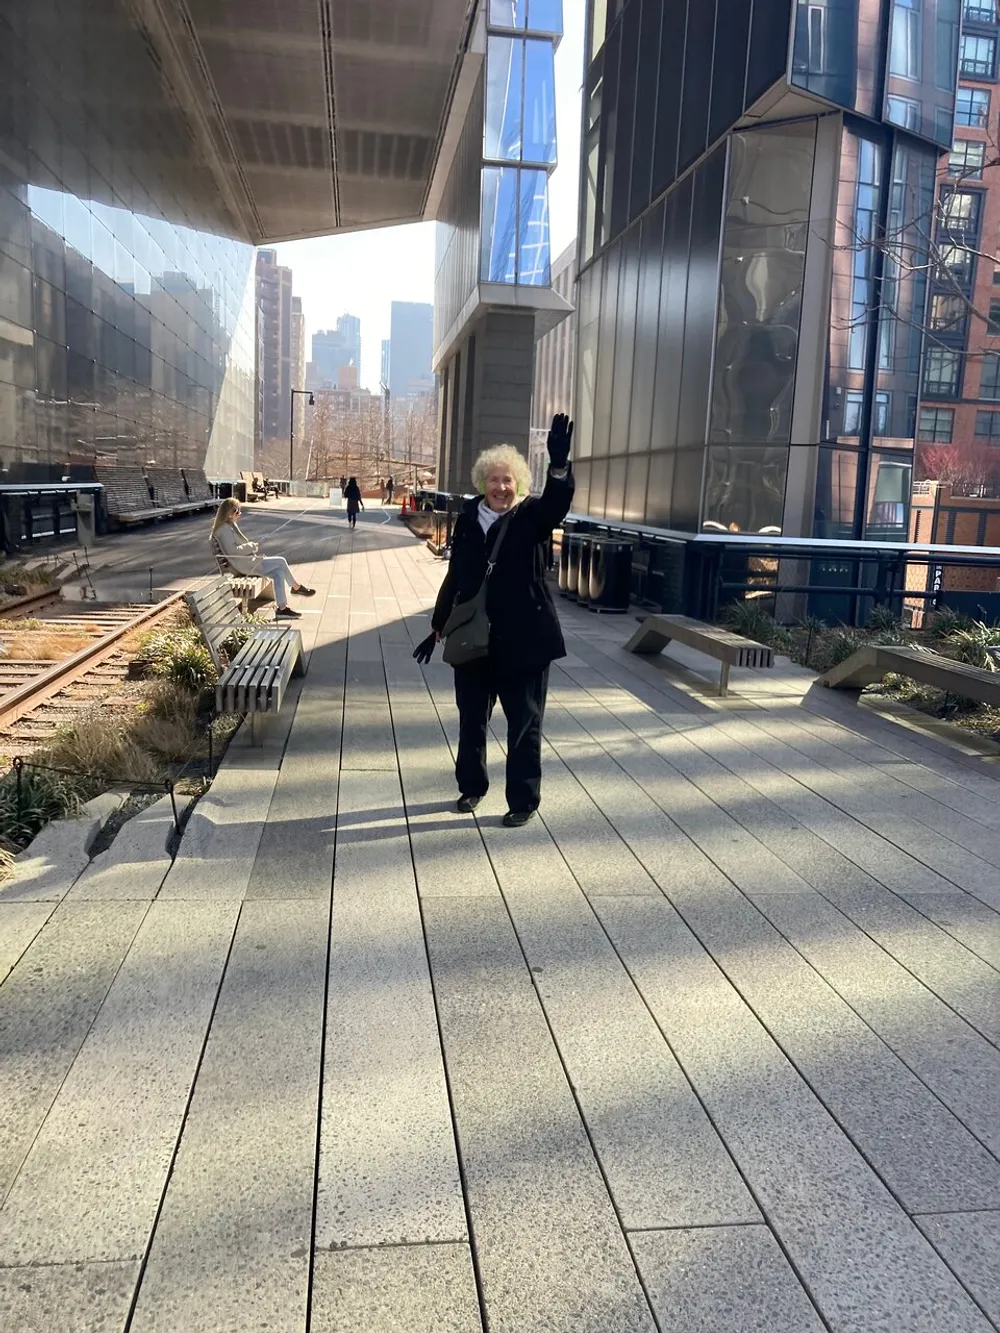 A person with light hair waves cheerfully while walking along an urban highline park with high-rise buildings and seated individuals in the background